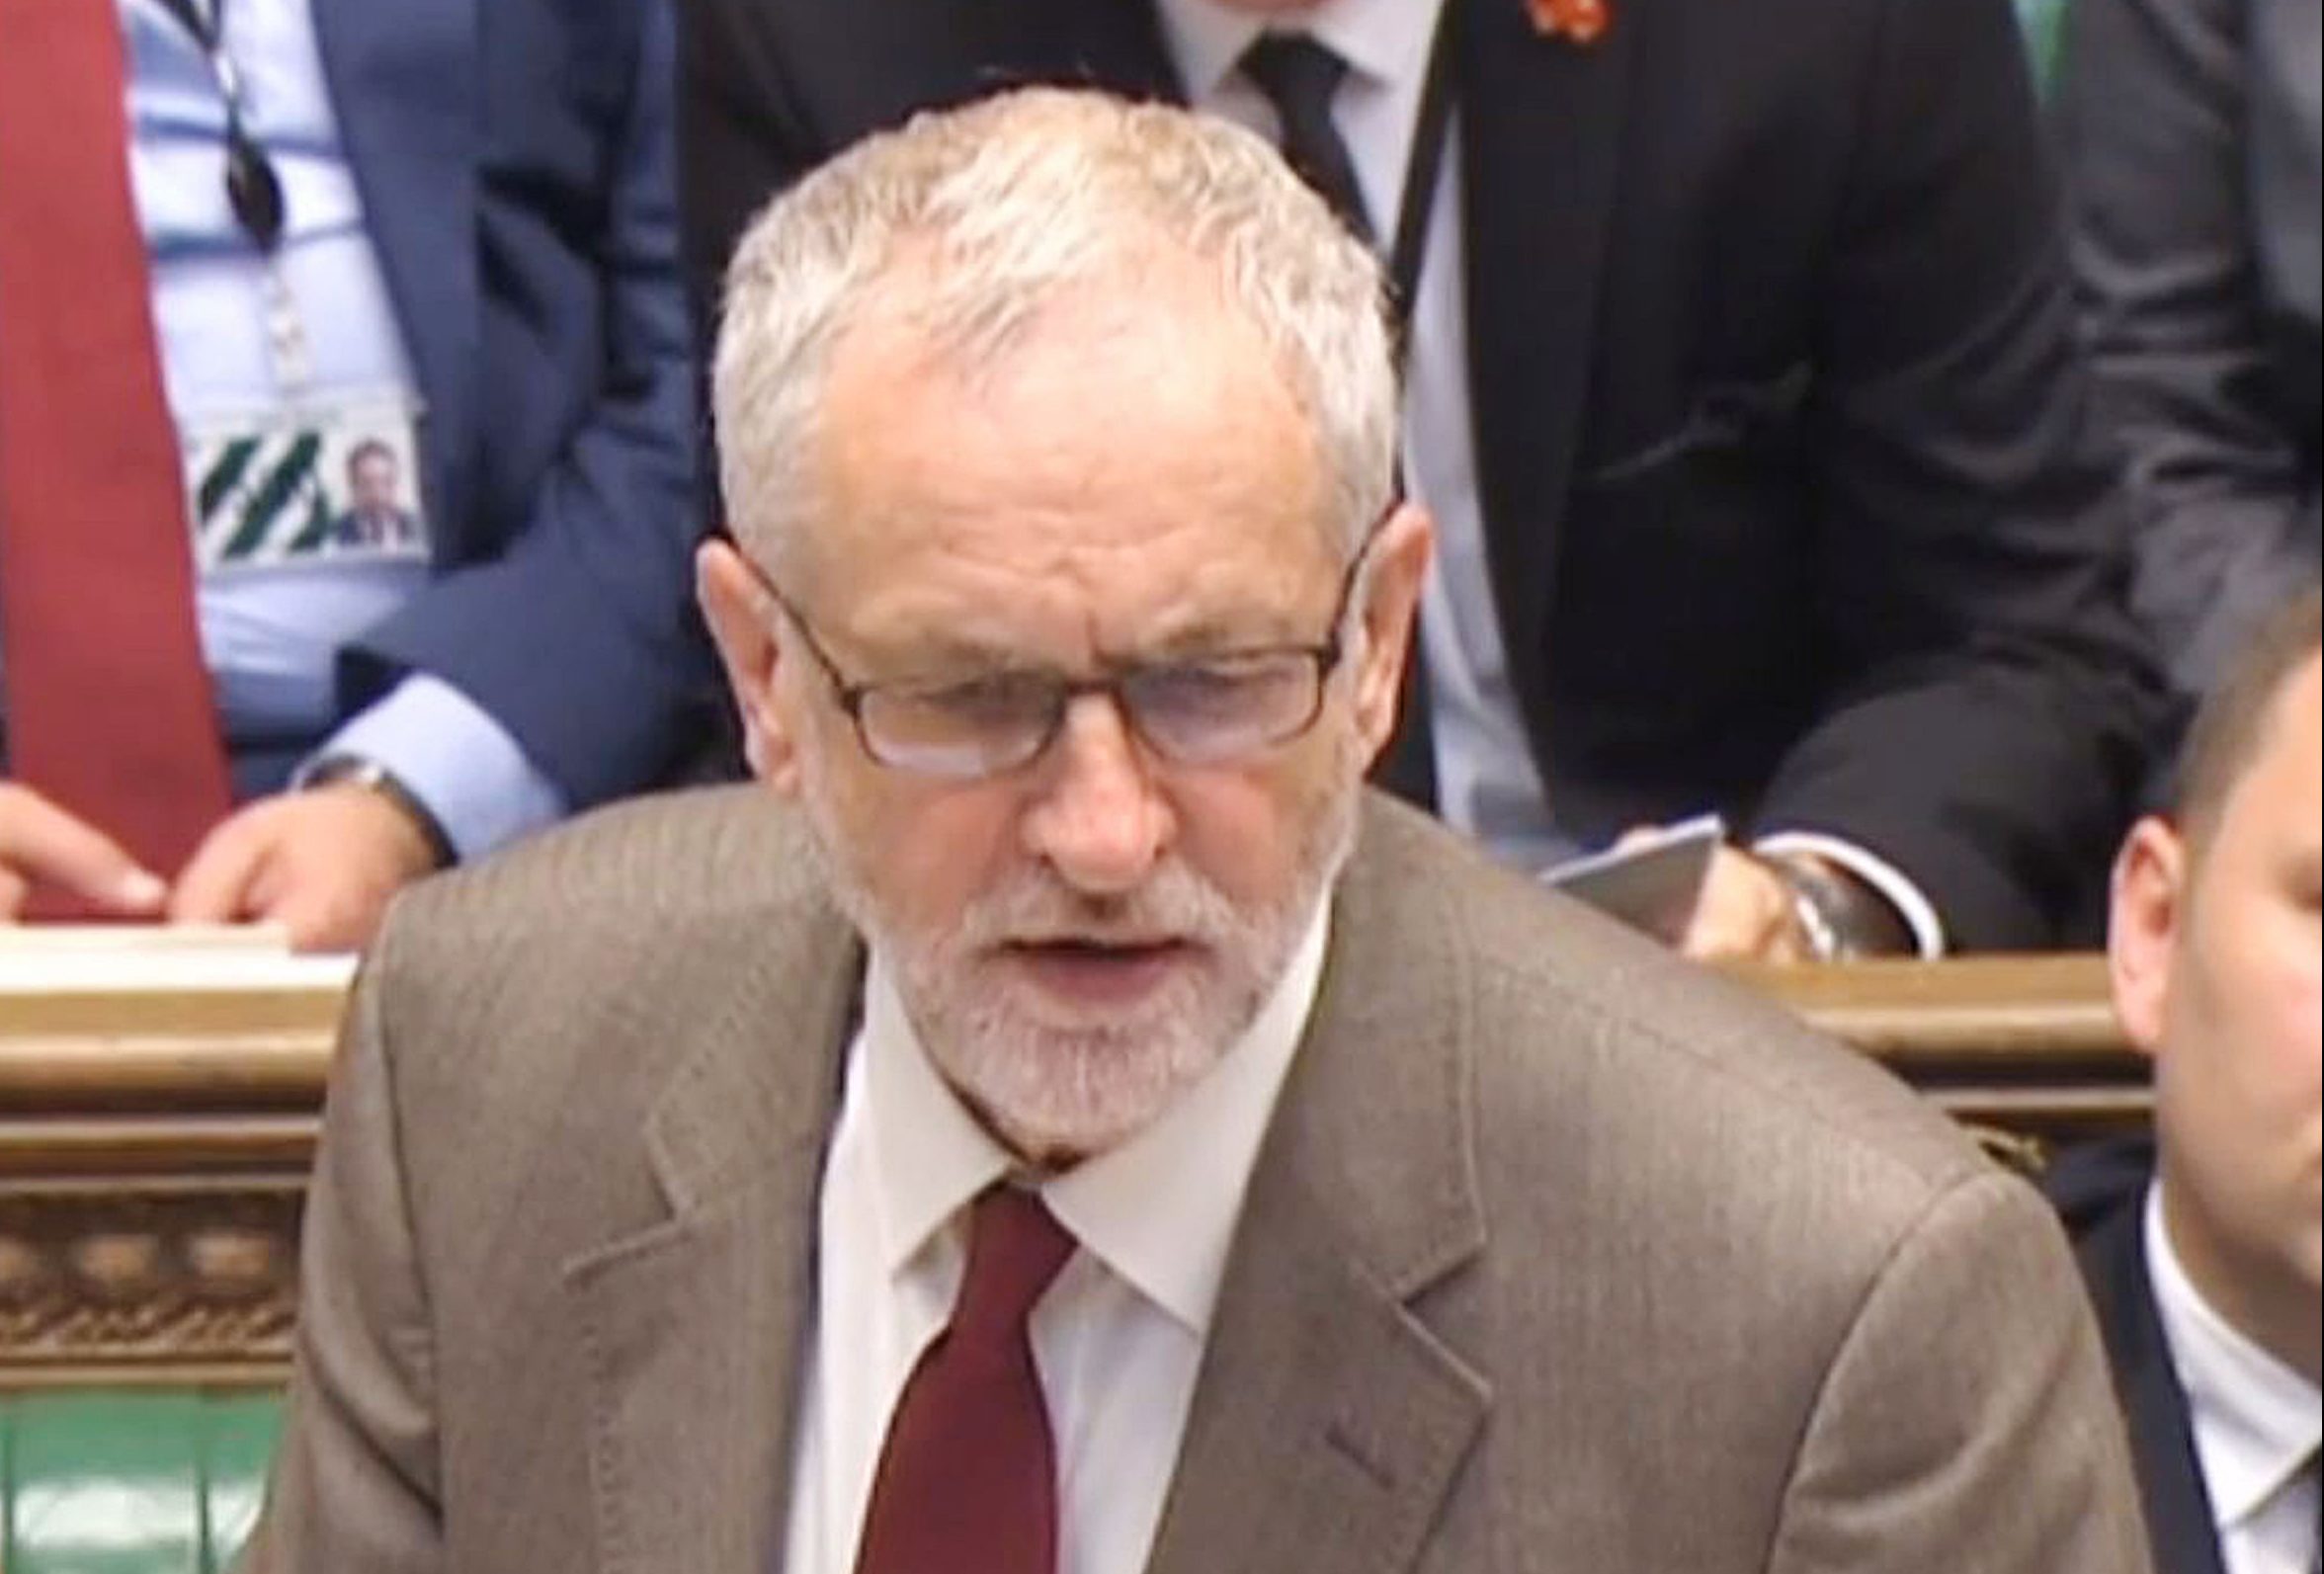 Labour leader Jeremy Corbyn speaking during Prime Minister's Questions.